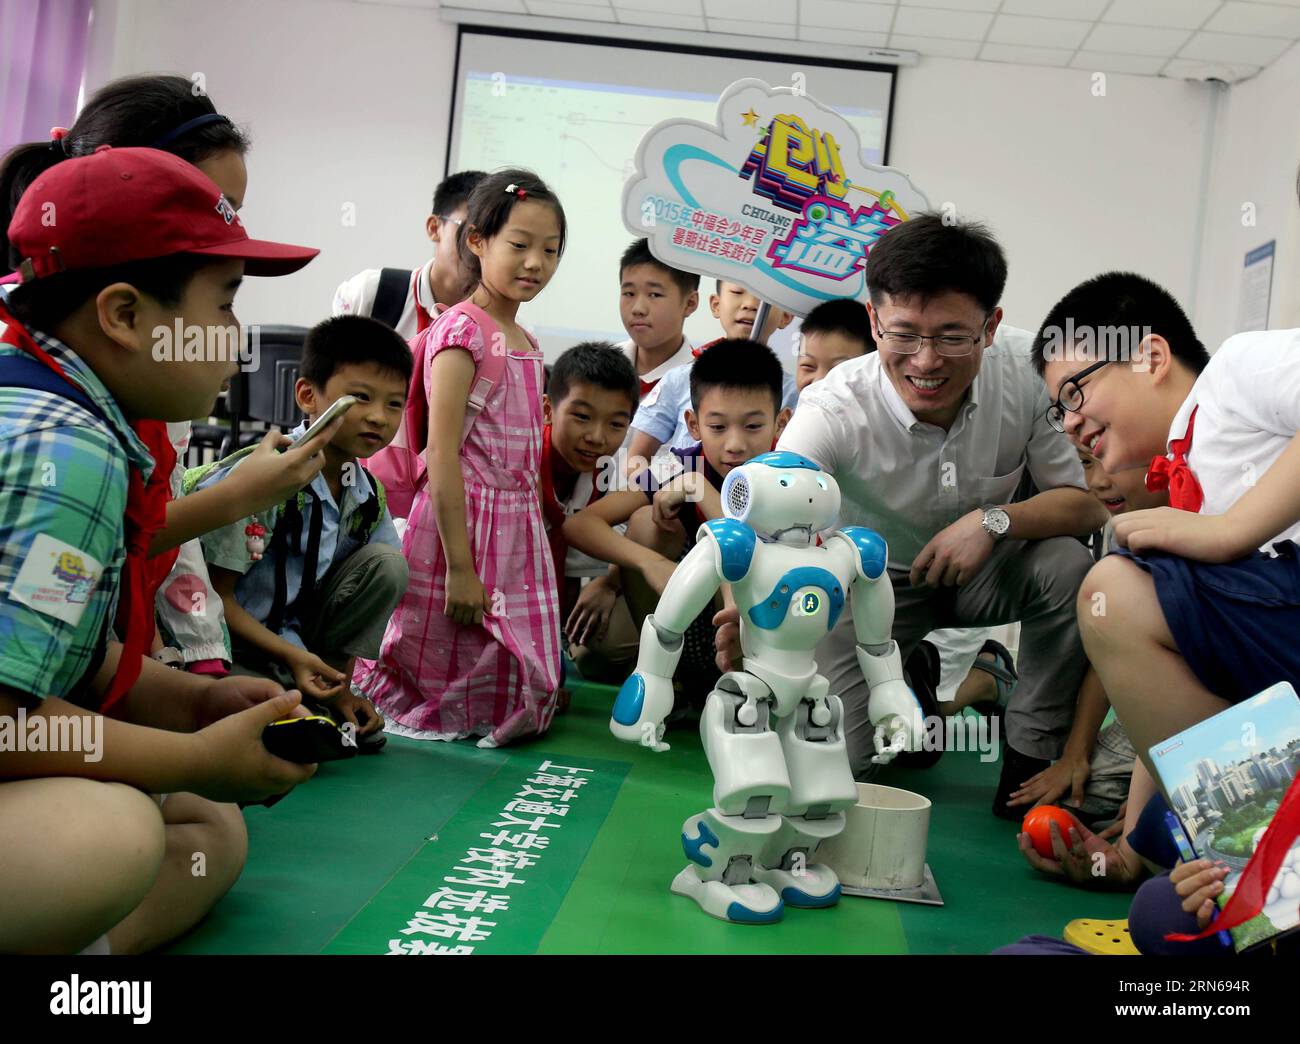 (150716) -- SHANGHAI, July 16, 2015 -- Professor Leng Chuntao introduces Robot Nao to children interested in scientific invention at a robot laboratory in Shanghai Jiaotong University, east China, July 16, 2015. Nao is a 58-centimeter tall robot developed and manufactured by Aldebaran Robotics, a Paris-based company. ) (dhf) CHINA-SHANGHAI-CHILDREN-MEET-ROBOT (CN) LiuxYing PUBLICATIONxNOTxINxCHN   150716 Shanghai July 16 2015 Professor Ling Chuntao introduces Robot Nao to Children interested in Scientific Invention AT a Robot Laboratory in Shanghai Jiaotong University East China July 16 2015 N Stock Photo